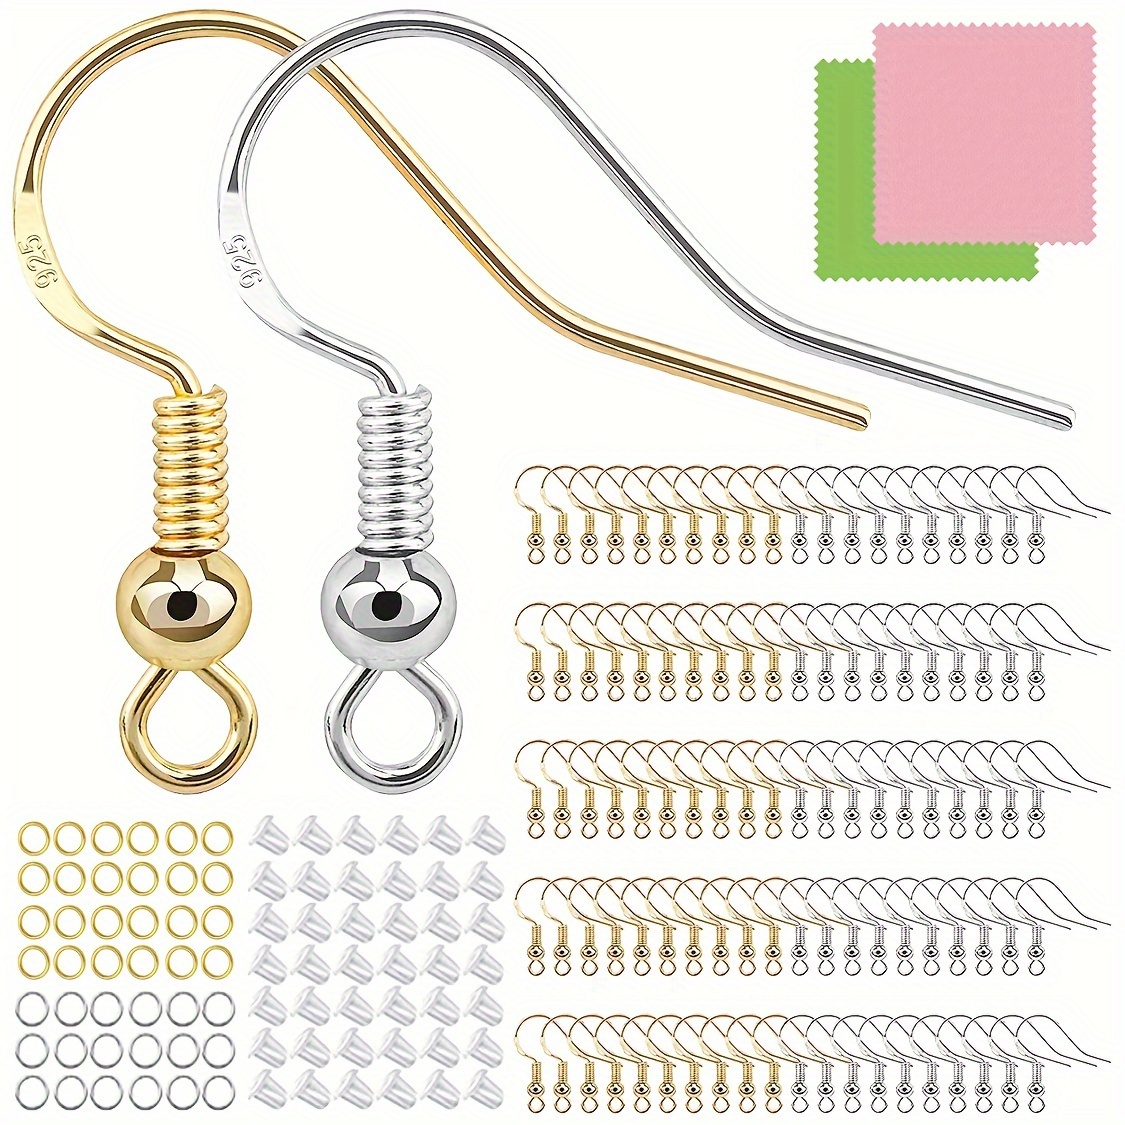 925 Sterling Silver Earring Hooks 150 PCS/75 Pairs,Ear Wires Fish  Hooks,500pcs Hypoallergenic Earring Making kit with Jump Rings and Clear  Silicone